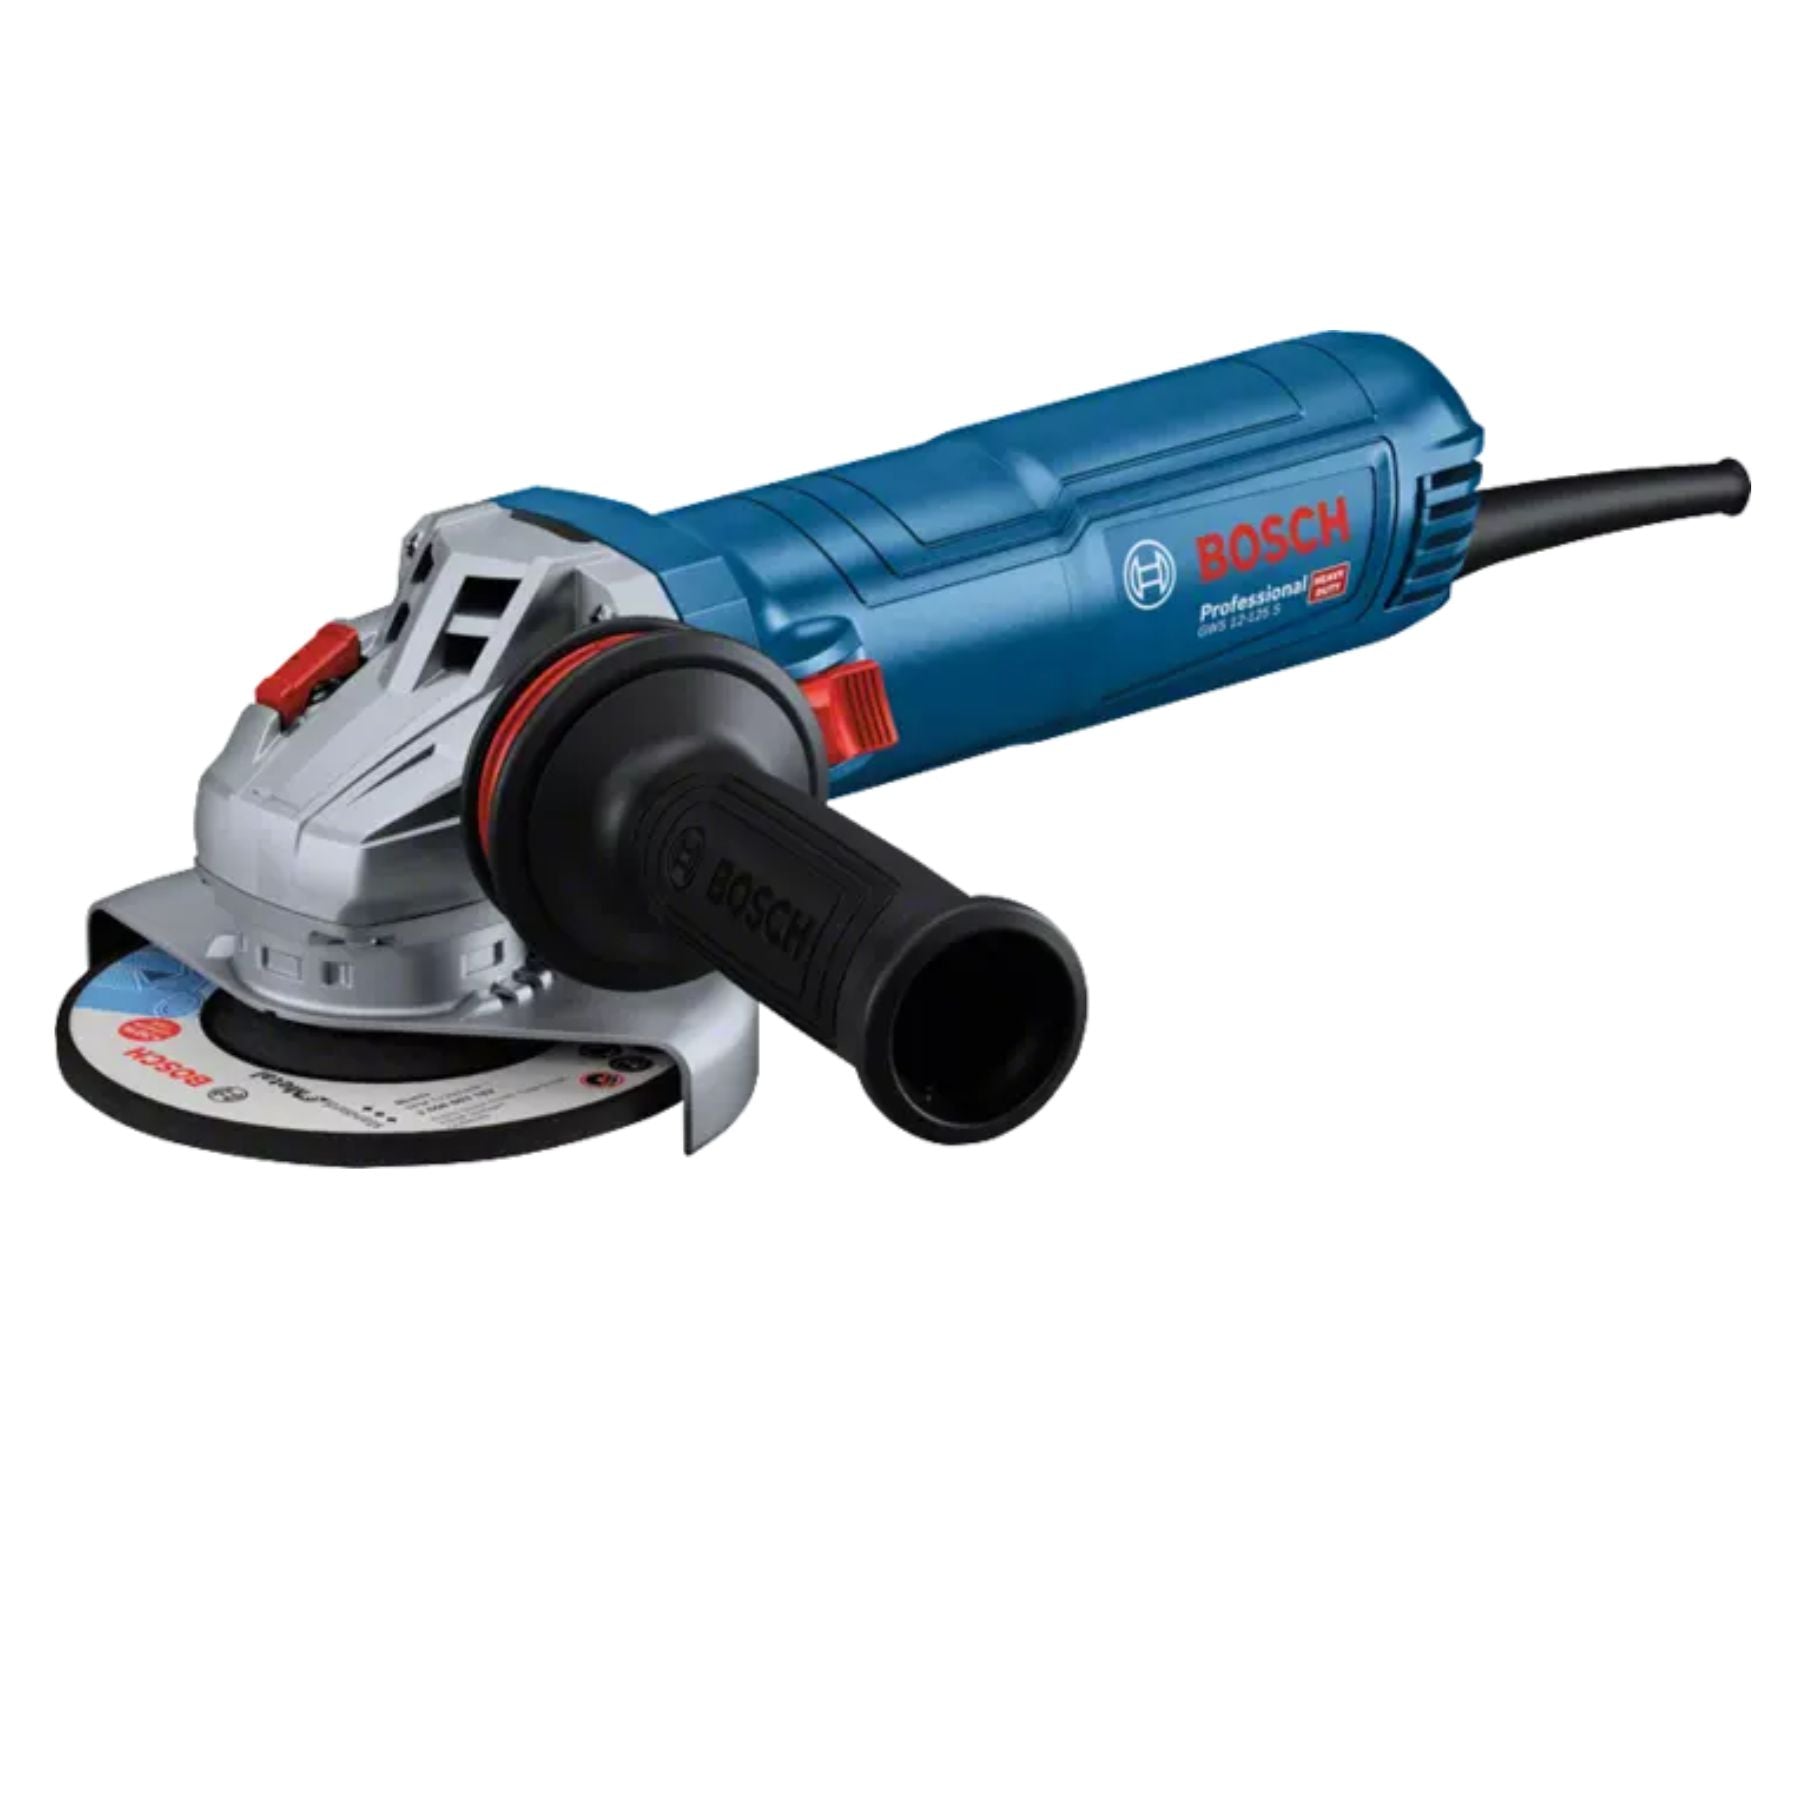 BOSCH (GWS 12-125 S) 5 inch Small Angle Grinder